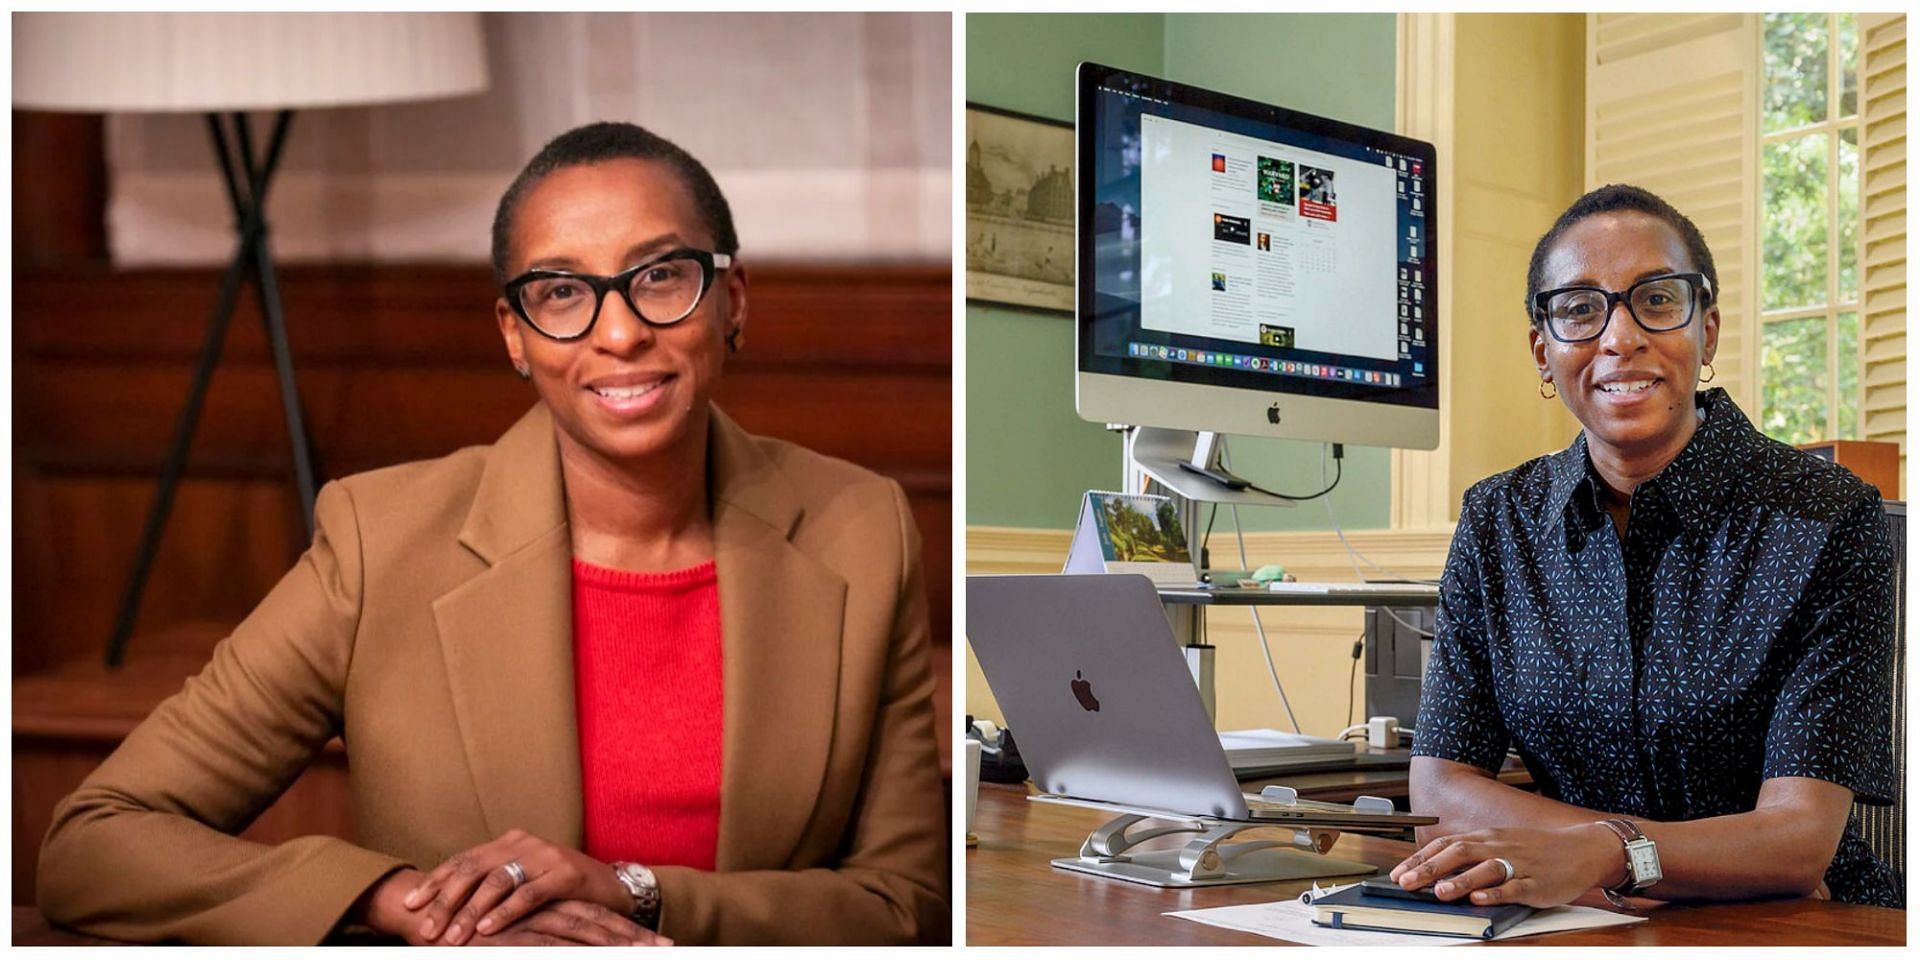 Claudine Gay becomes the first black woman to head Harvard as she becomes the new president of the Ivy League college. (Image via Harvard Magazine)